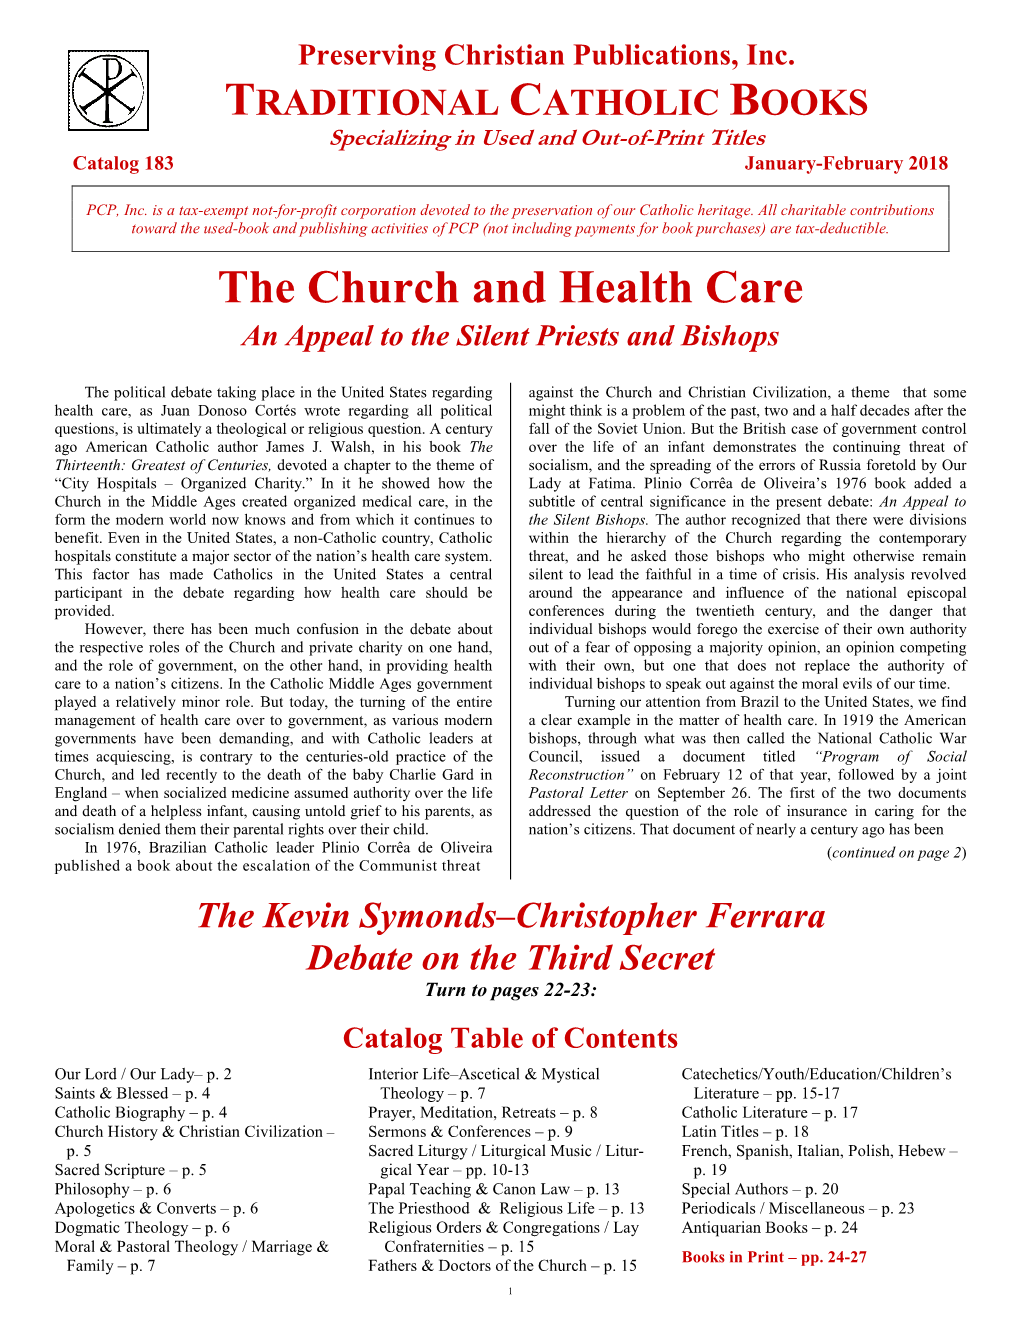 The Church and Health Care an Appeal to the Silent Priests and Bishops